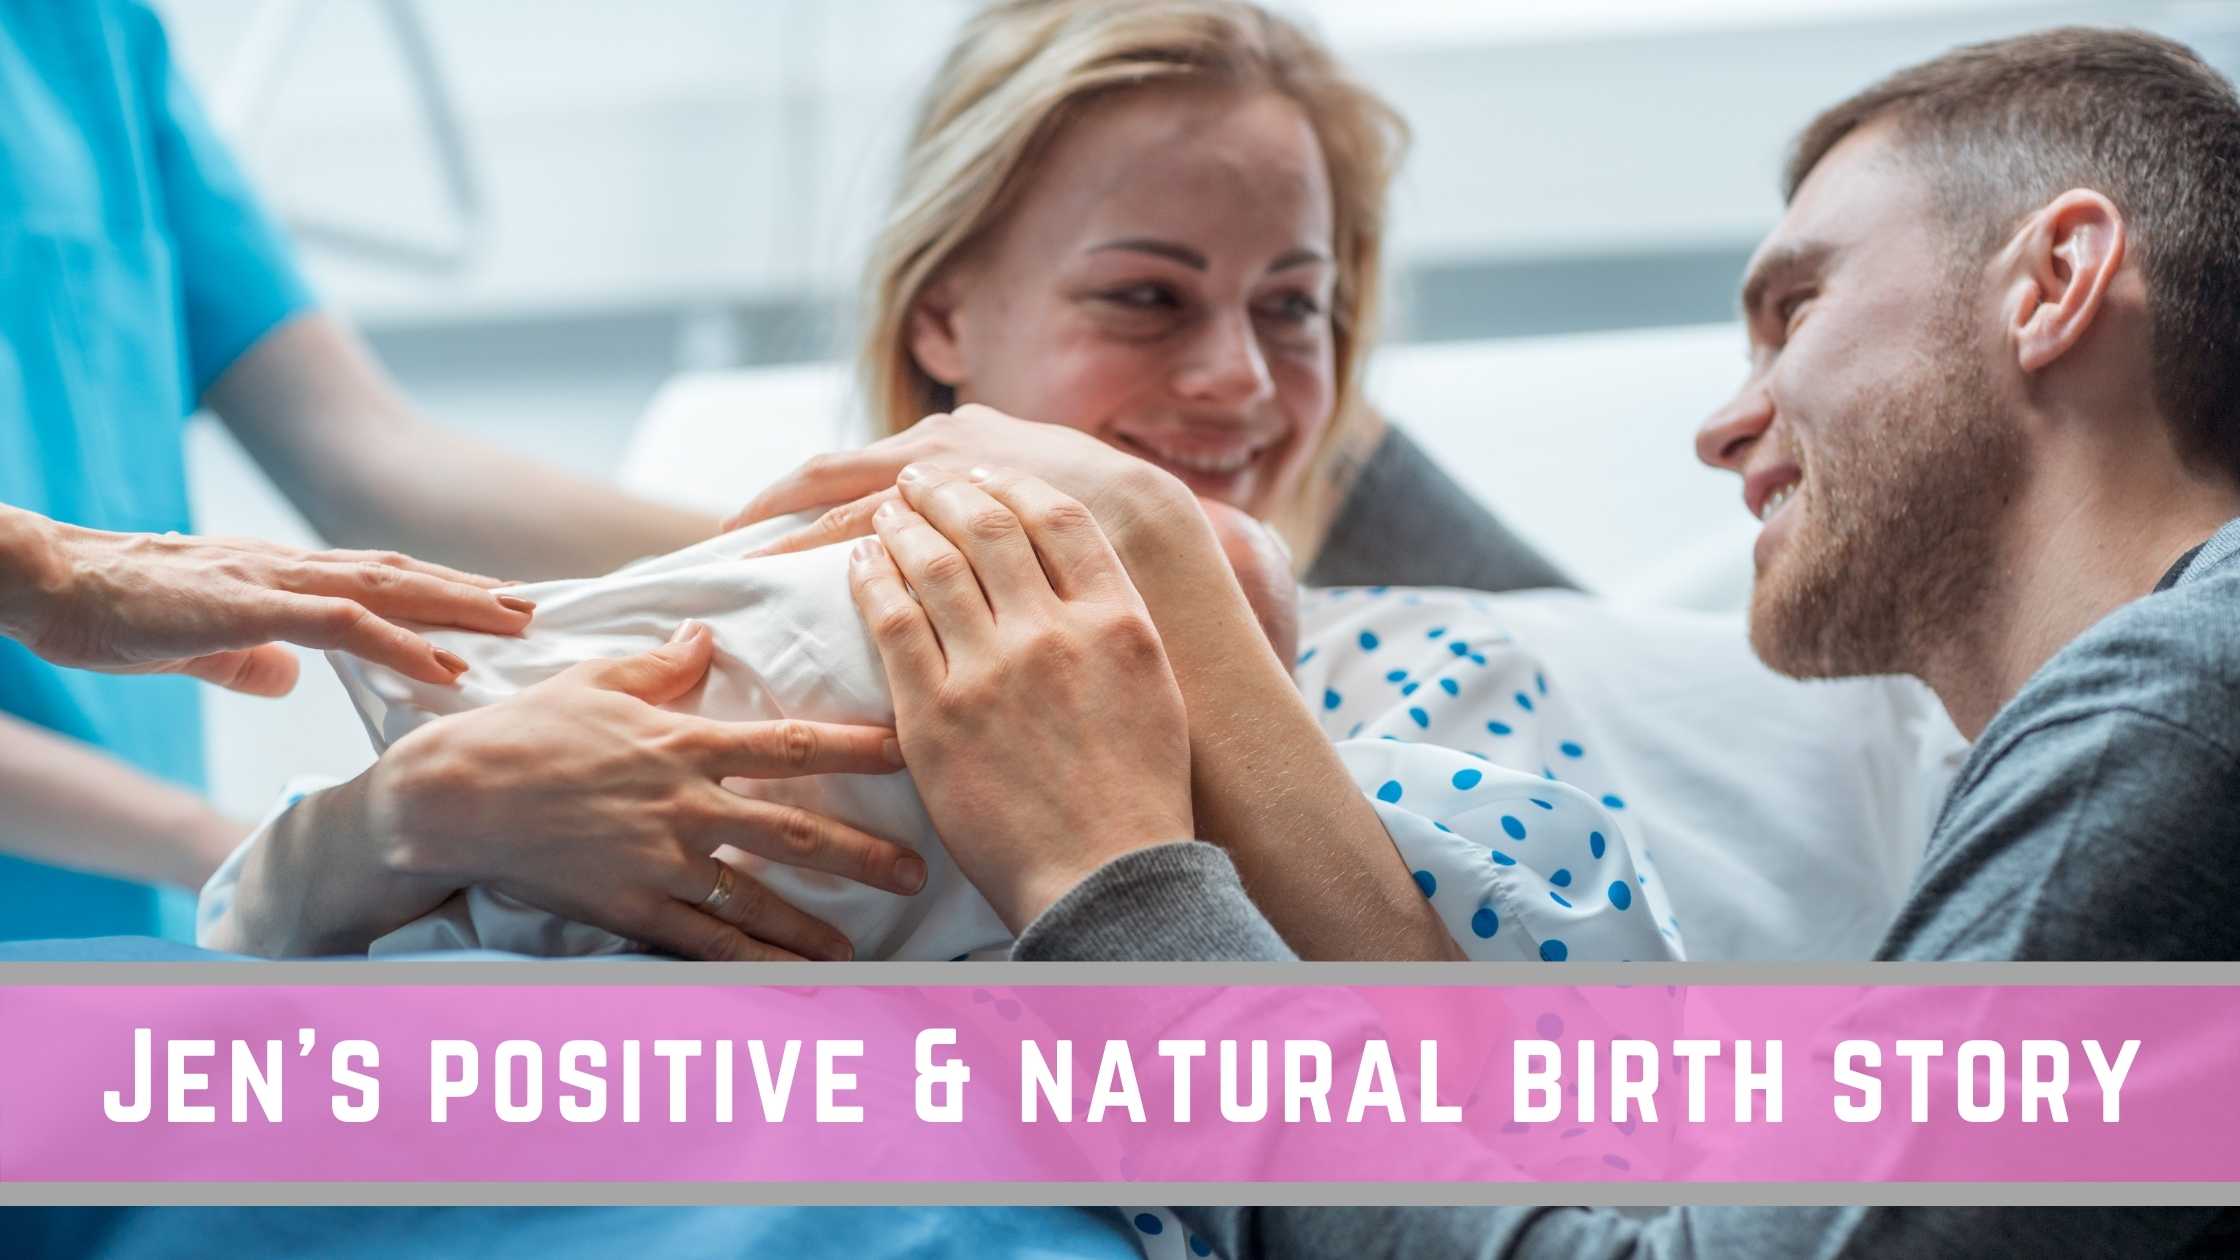 Jen's positive and natural birth story